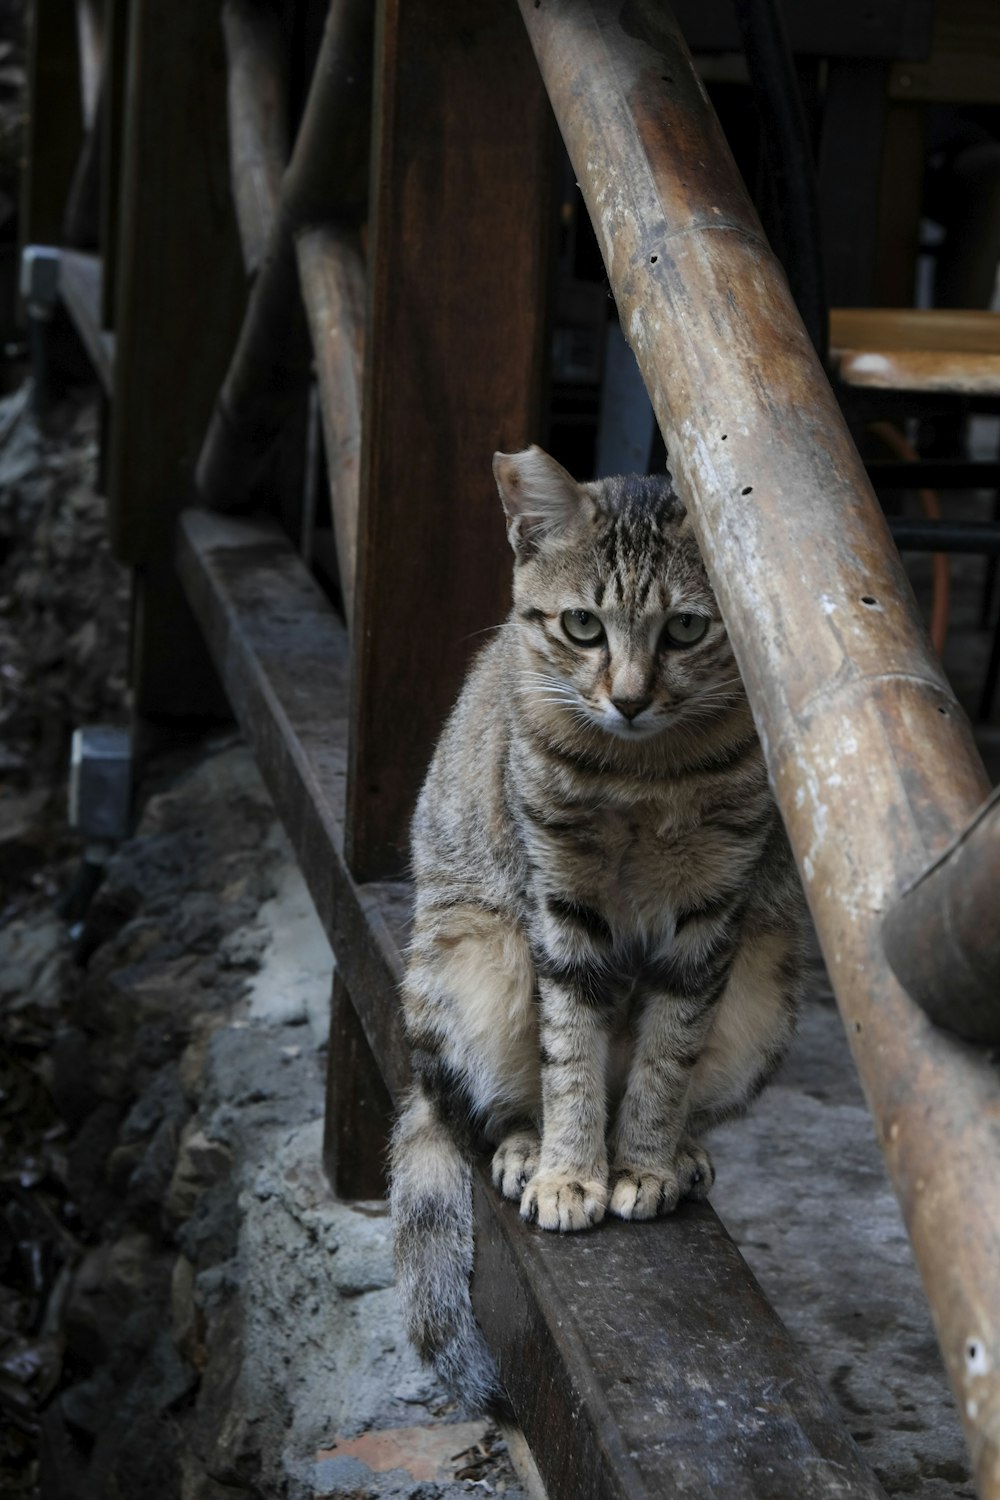 a cat is sitting on a wooden bench